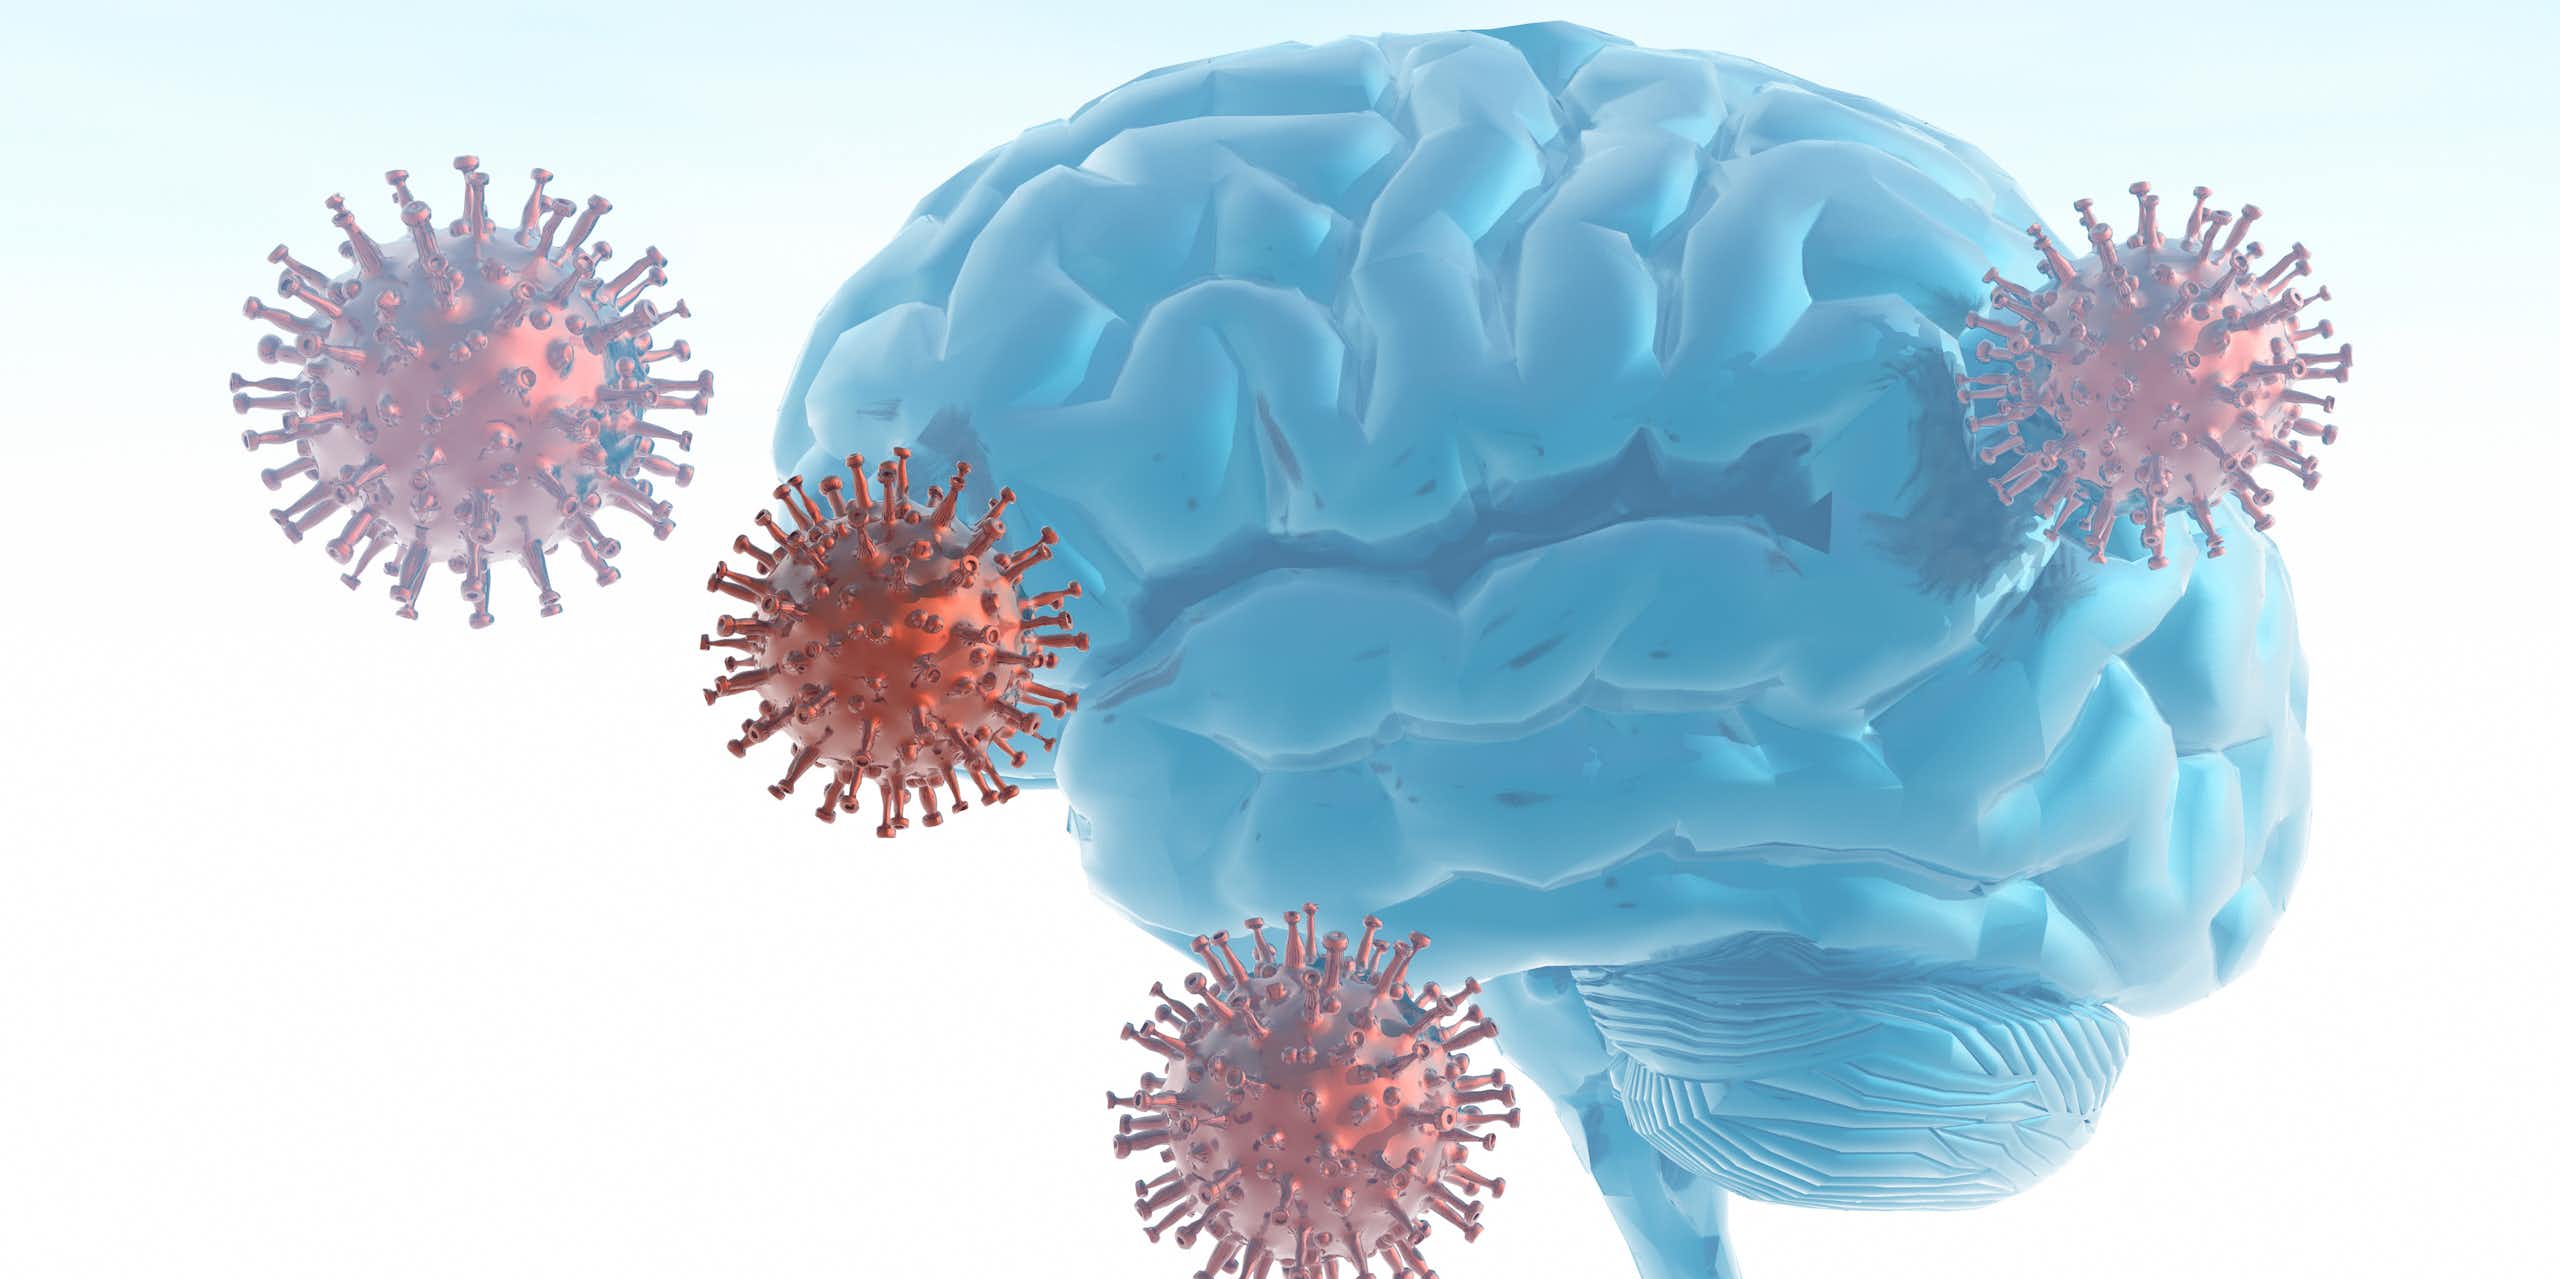 Conceptual illustration of brain fog with a brain surrounded by four SARS-CoV-2 viral particles.